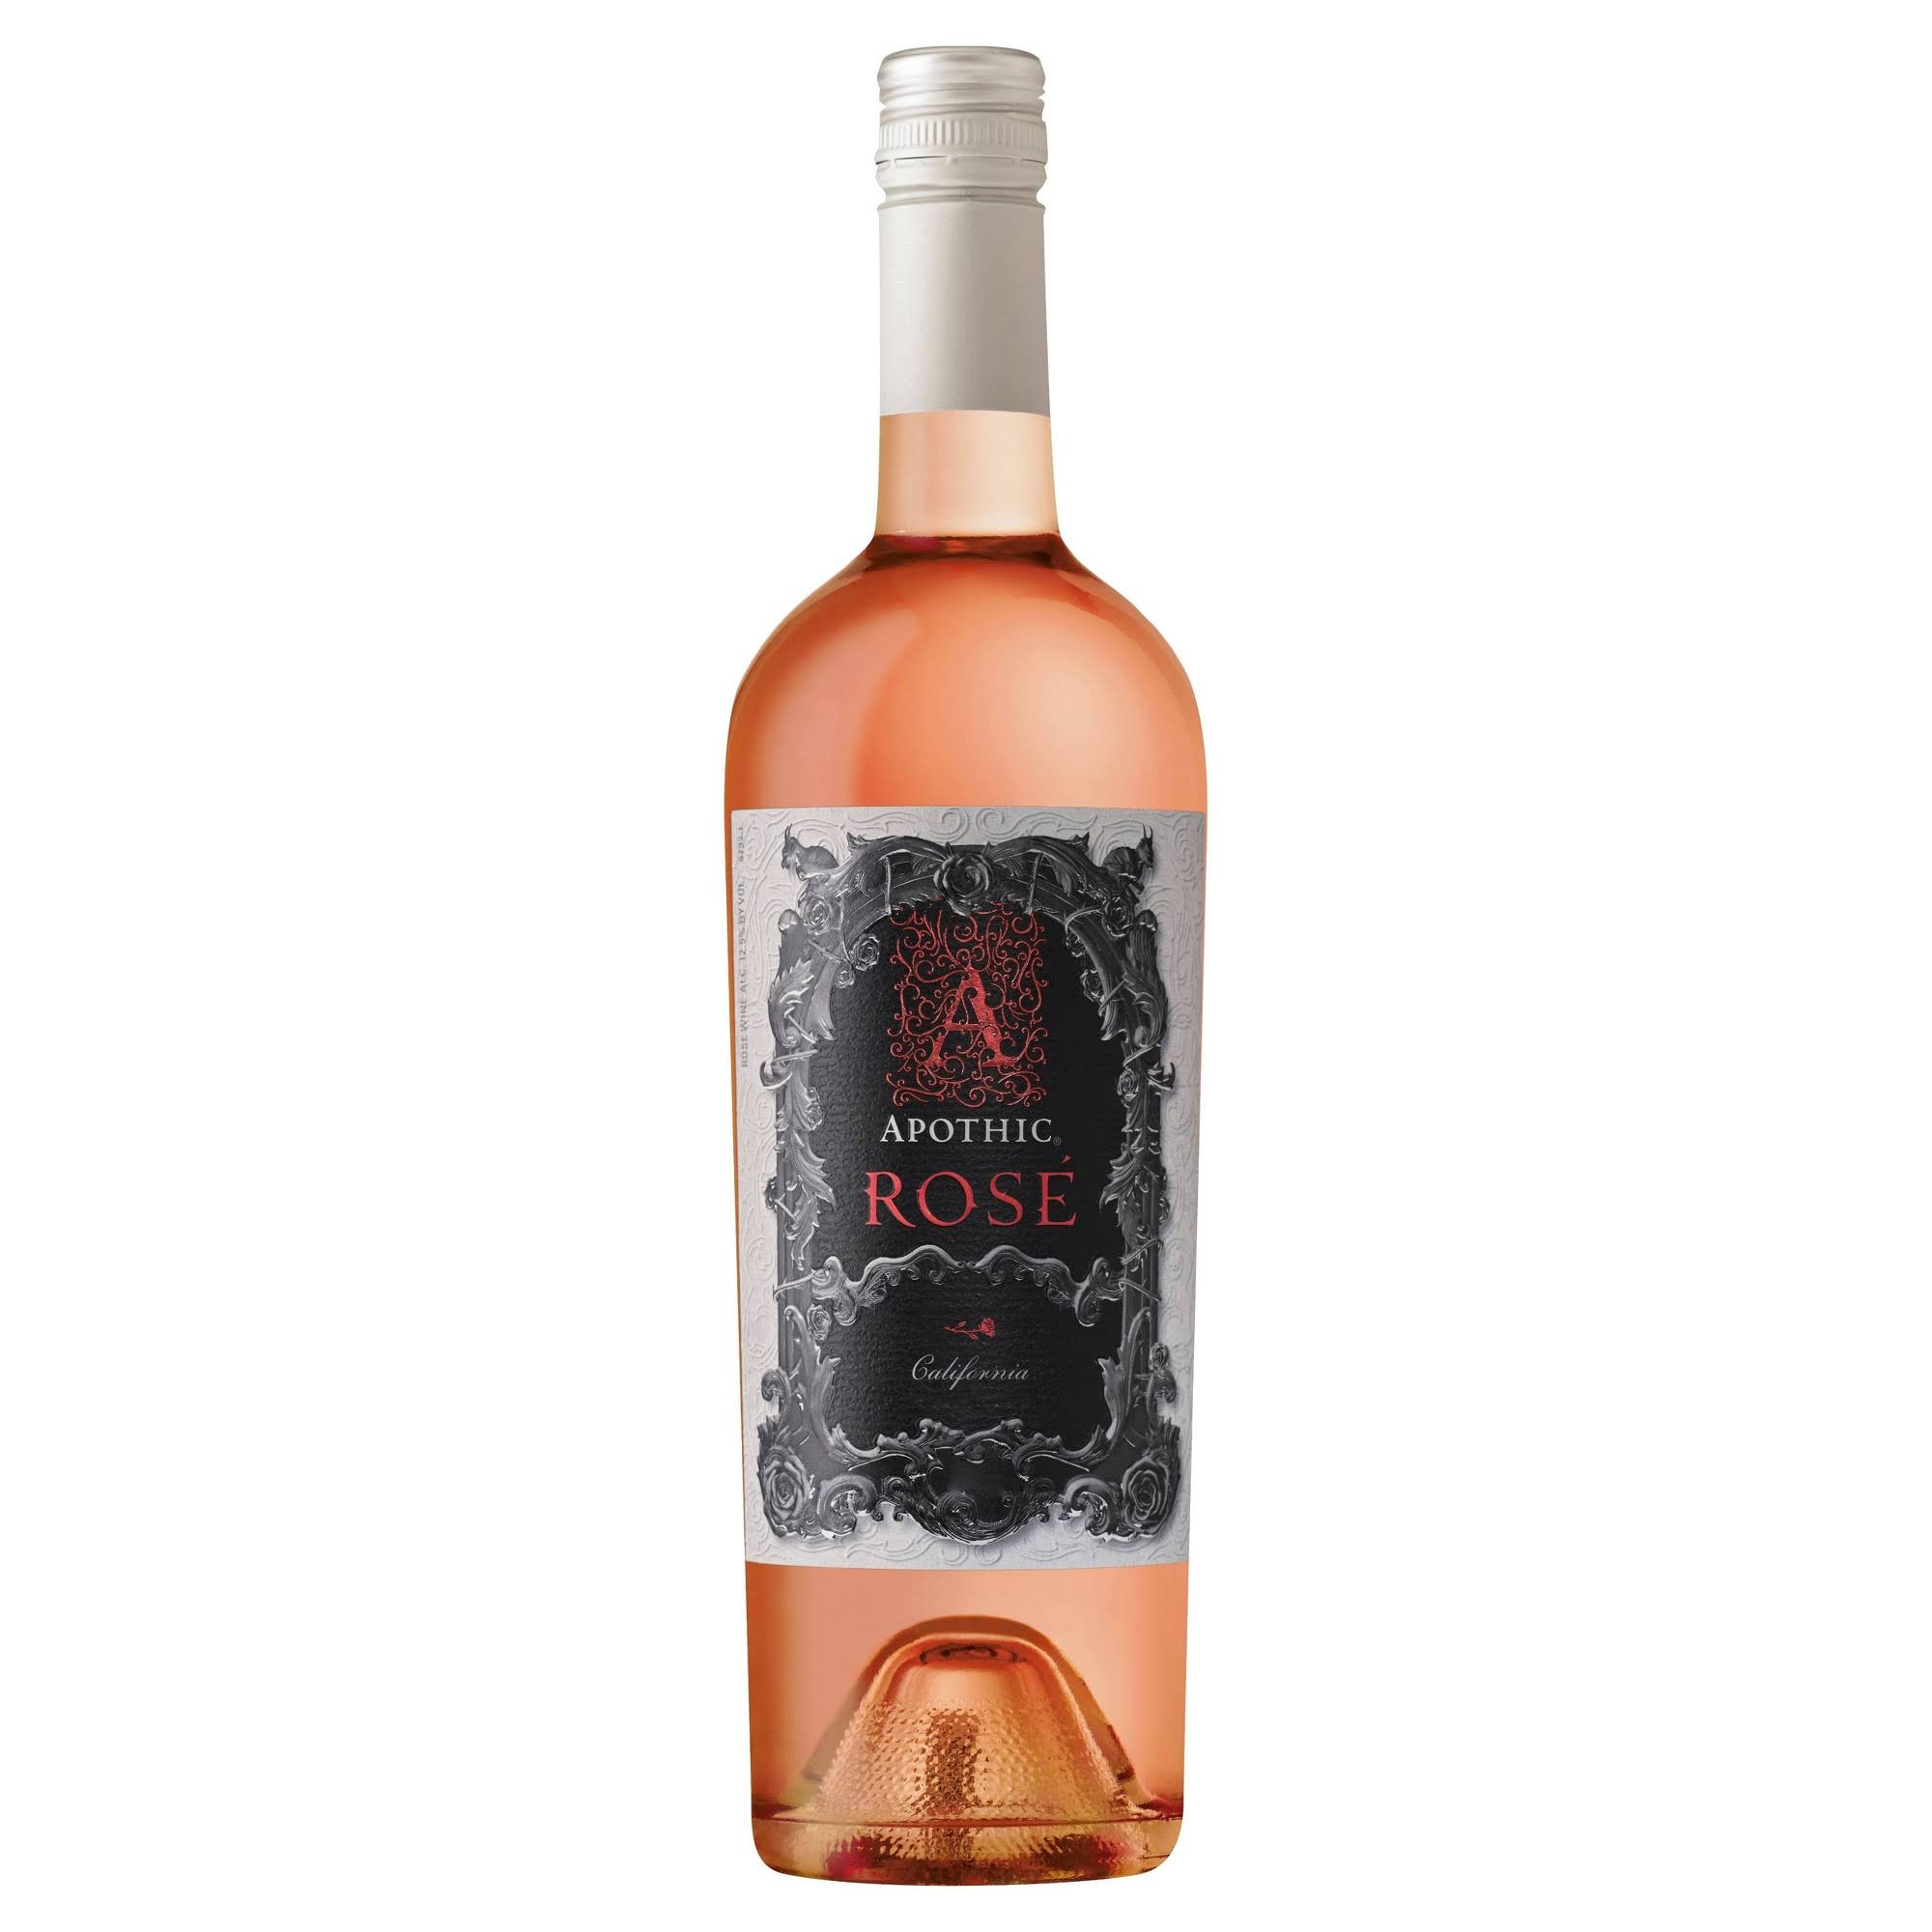 Apothic Rose Limited Release Wine, Sonoma County (Vintage Varies) - 750 ml bottle